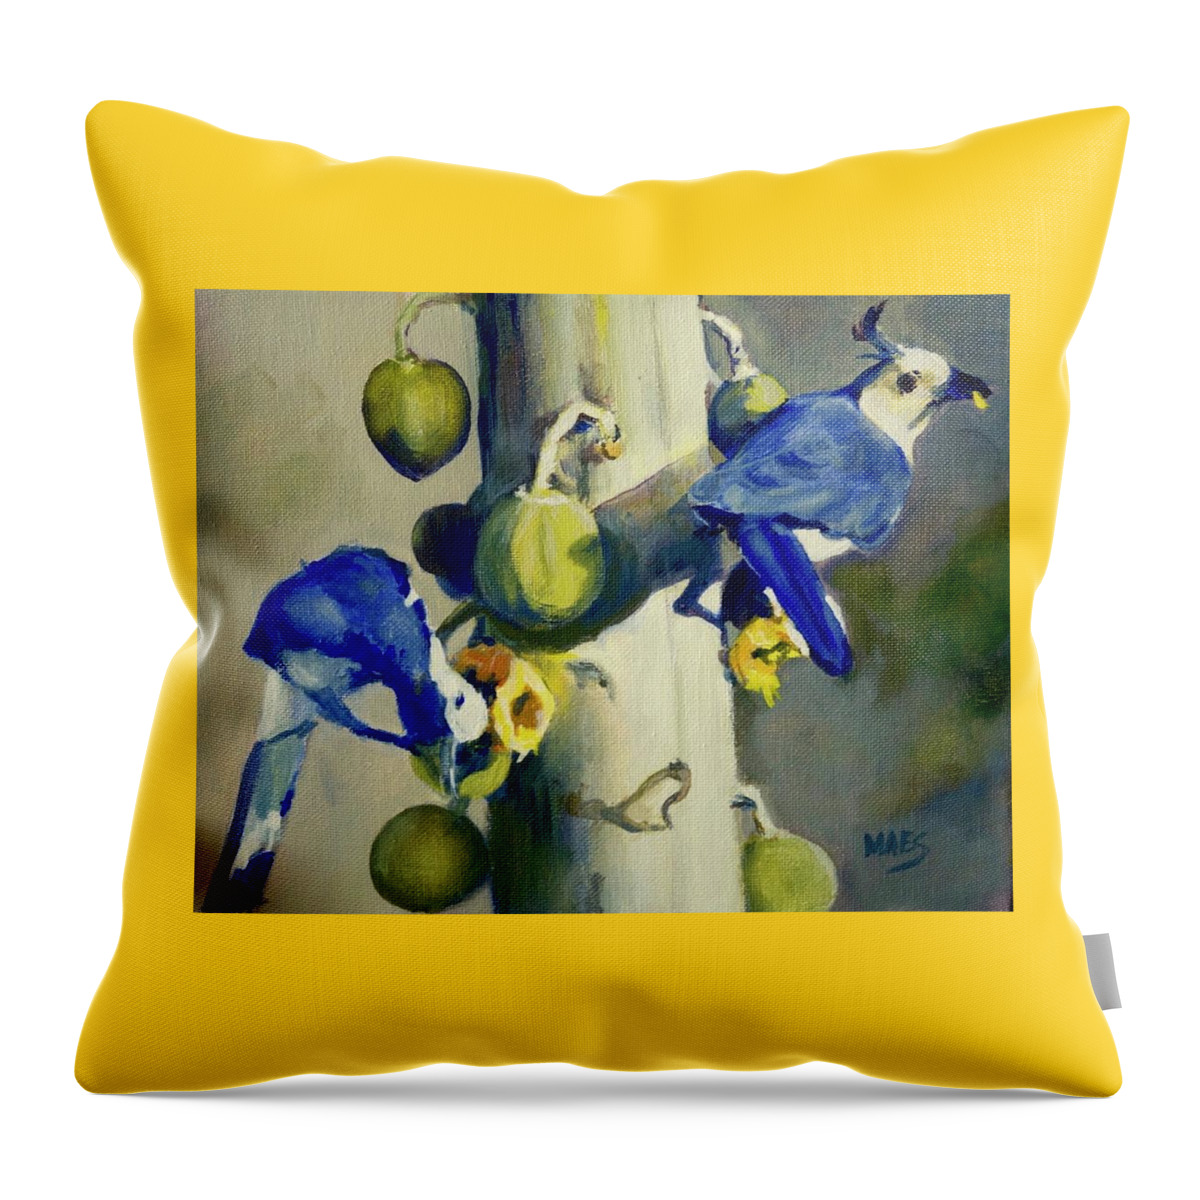 Birds Throw Pillow featuring the painting Thieves by Walt Maes